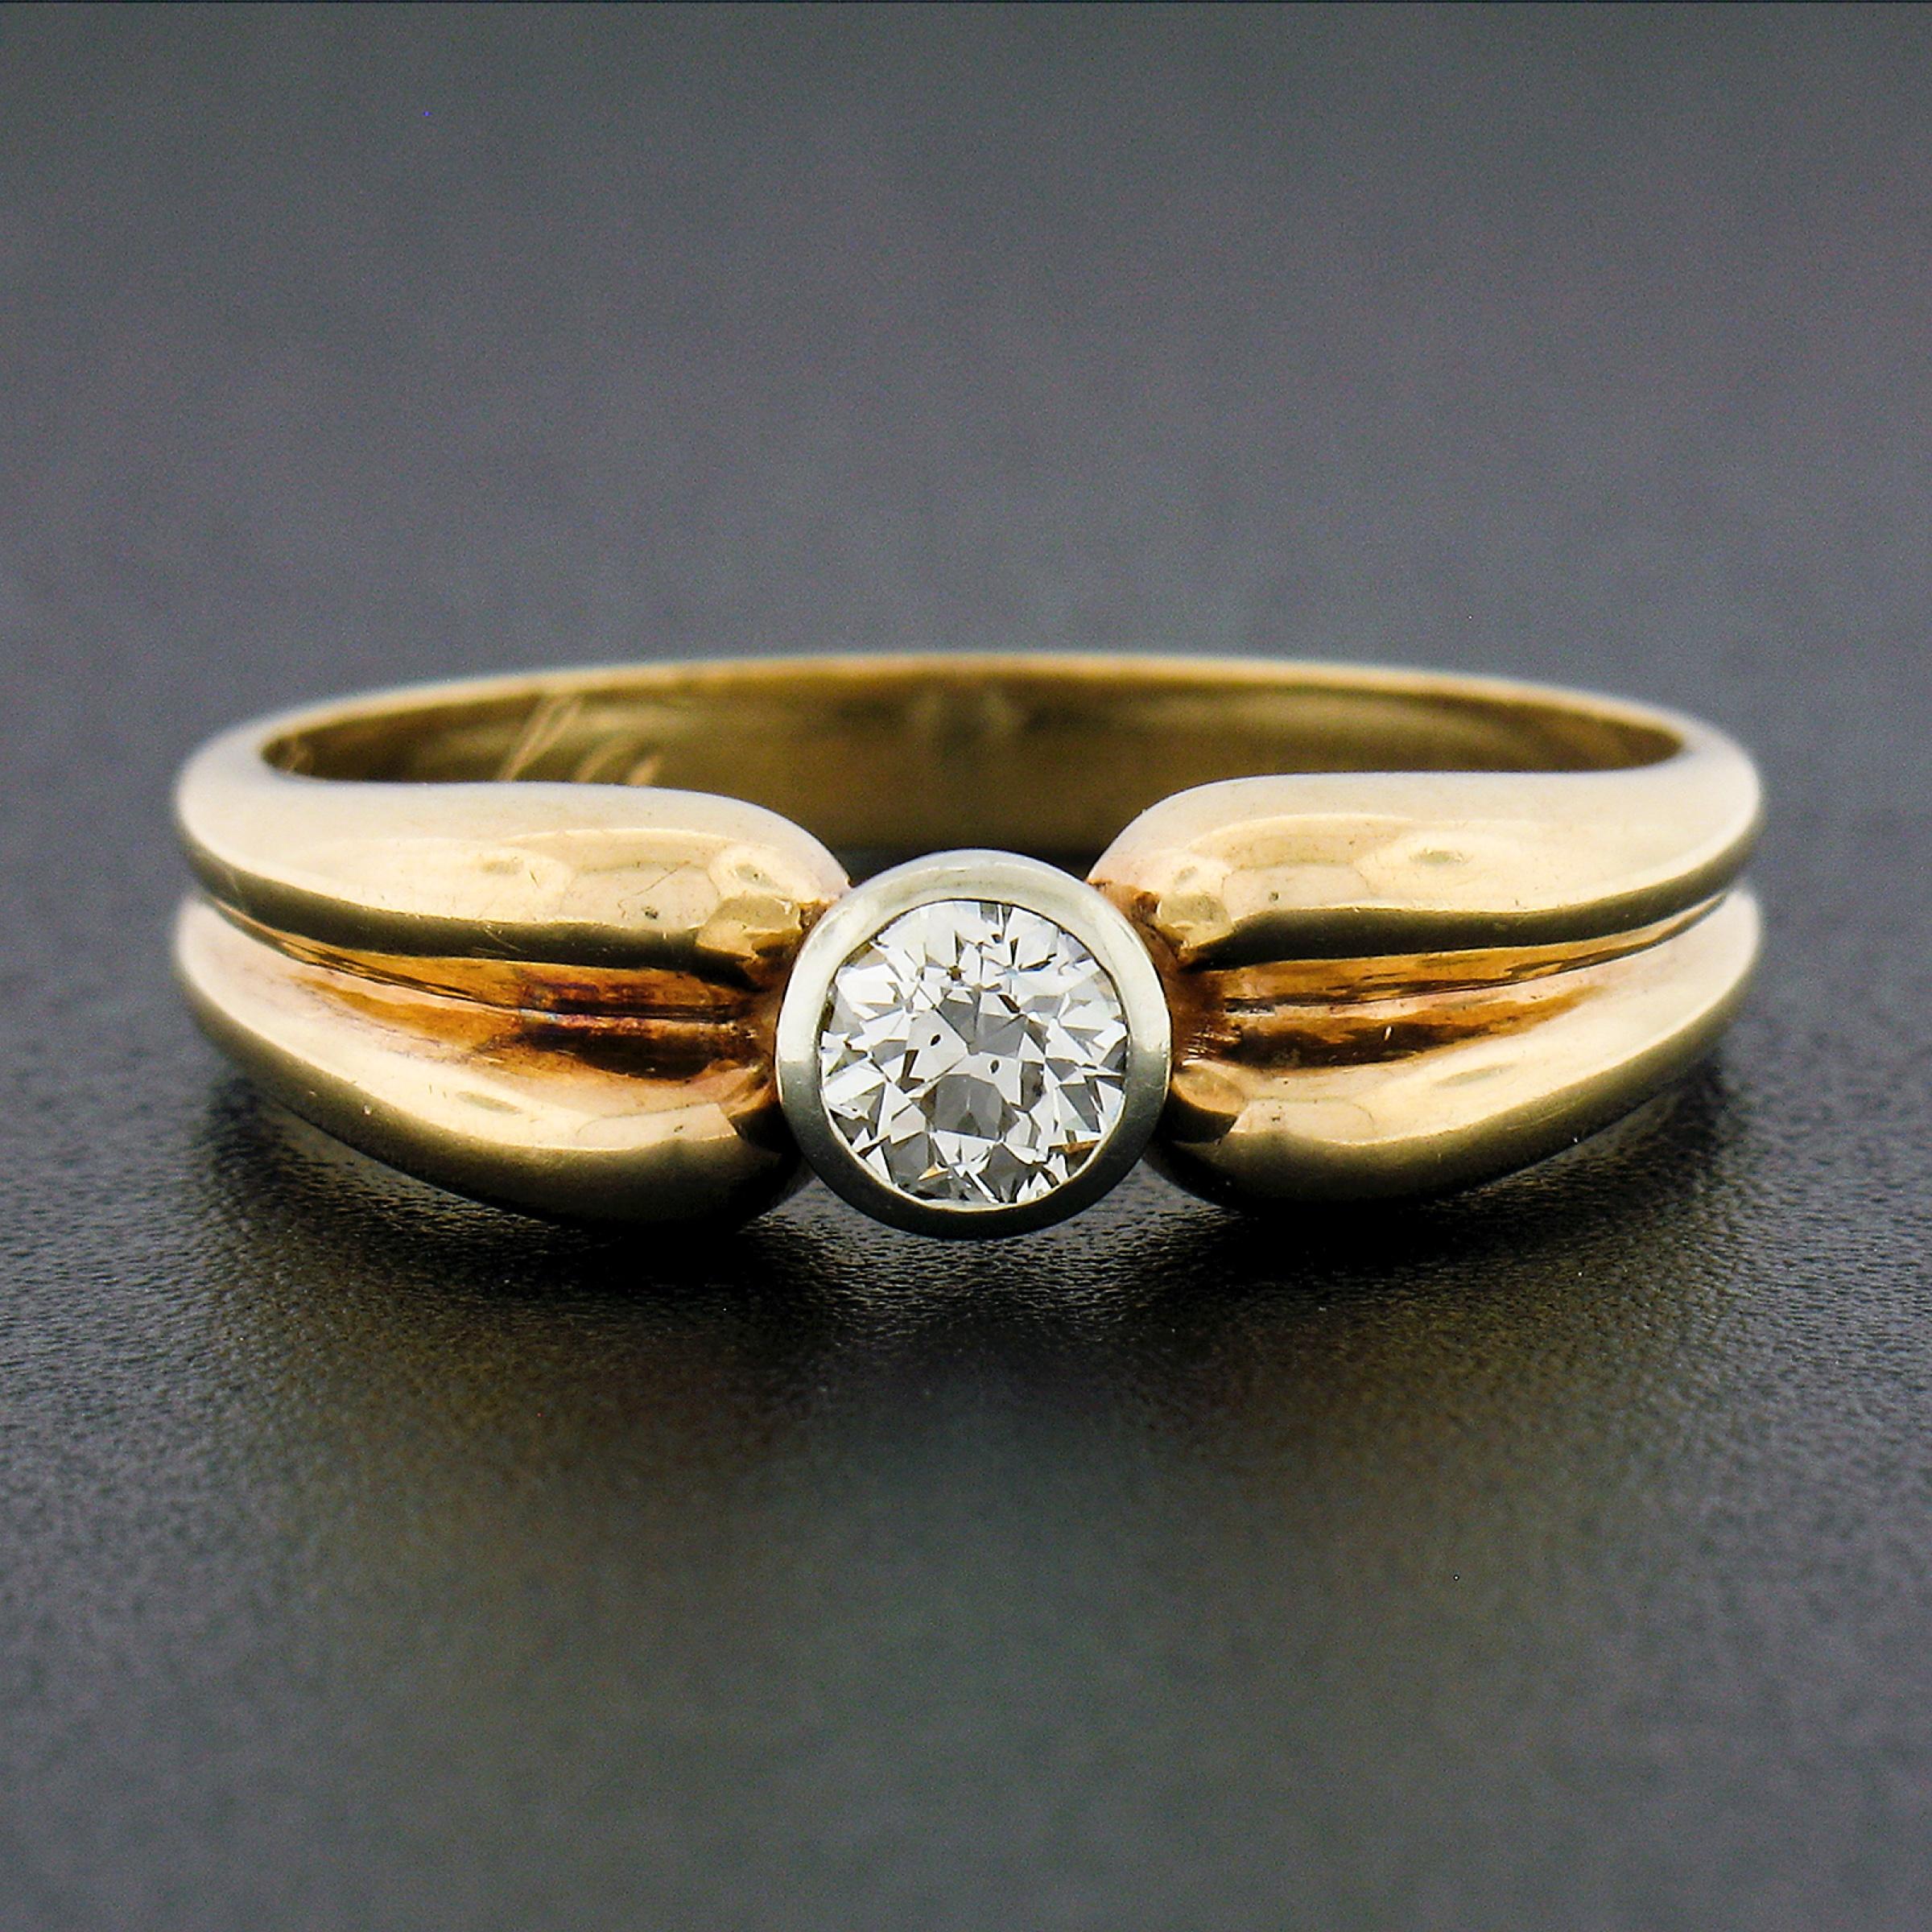 Antique Victorian 14K Gold Old European Diamond Solitaire Ring w/ Grooved Sides In Good Condition For Sale In Montclair, NJ